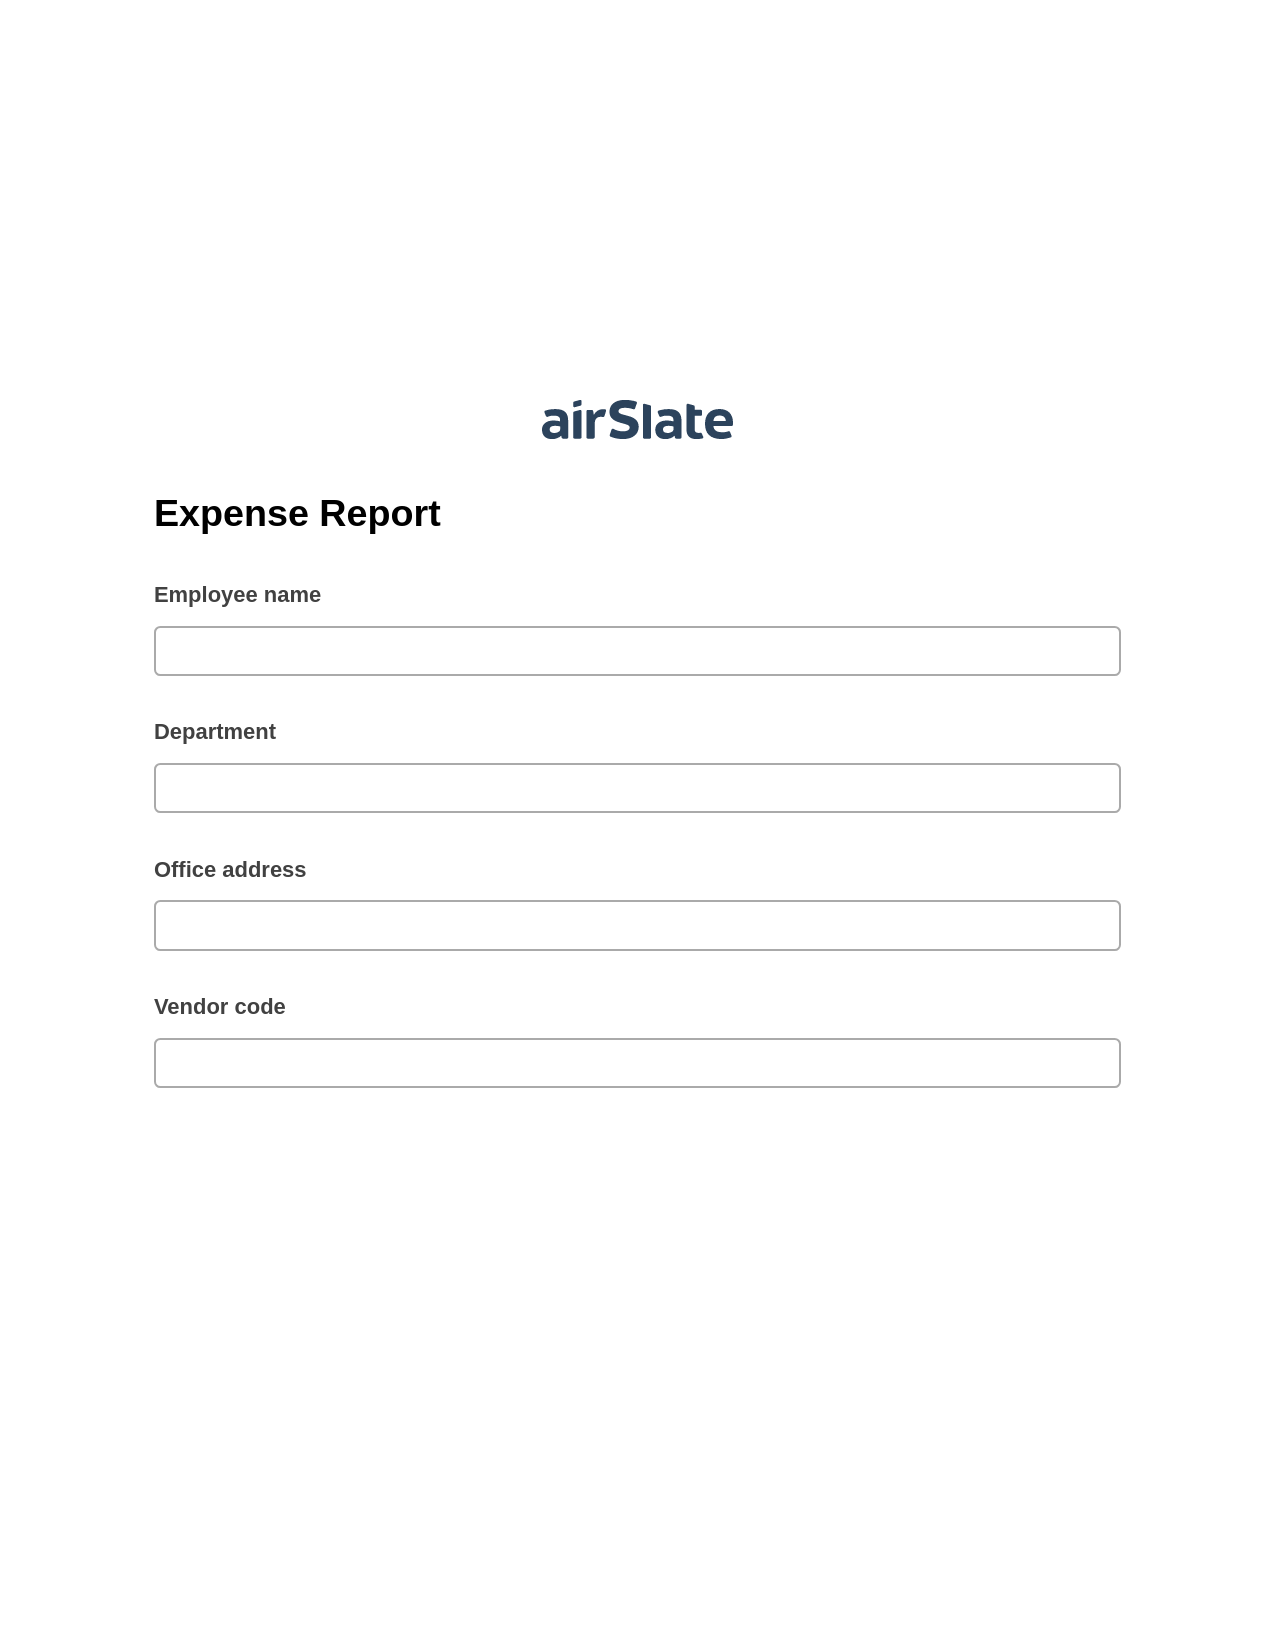 Expense Report Pre-fill from Excel Spreadsheet Bot, Lock the slate bot, Google Drive Bot